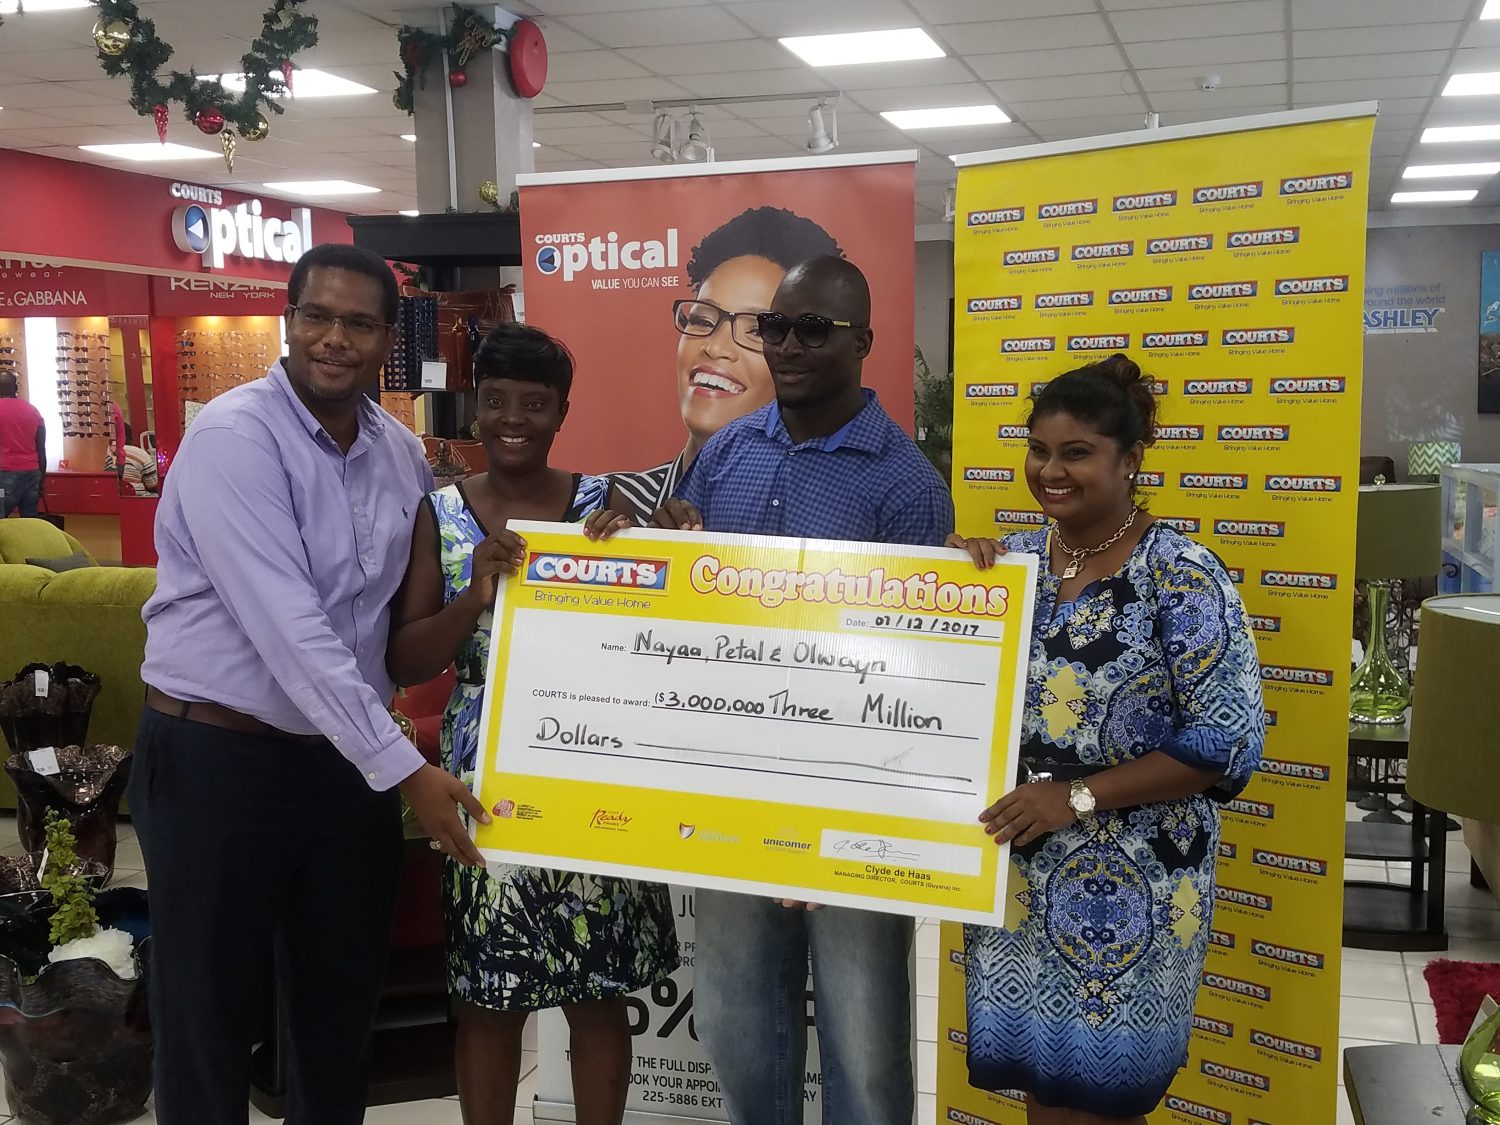 Courts million-dollar winners: From right are Petal Surujpaul, Olwin Lynch, Nayaa Rose and a Courts representative